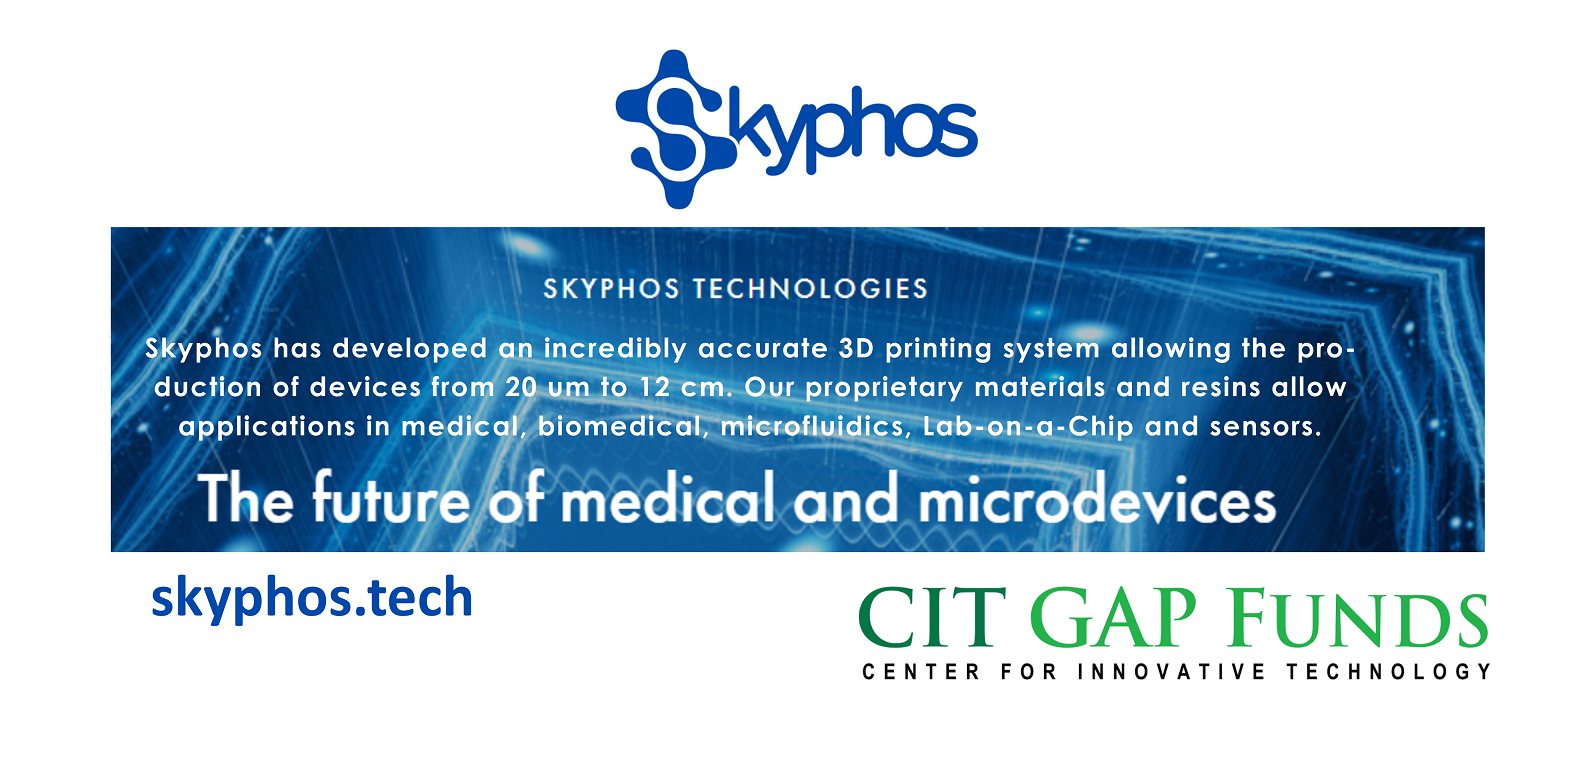 The Center for Innovative Technology (CIT) today announced that CIT GAP Funds - Virginia Founders Fund - has invested in Roanoke, Va.- based Skyphos Industries, an innovator in the three-dimensional printer (3DP) and biotech spaces.